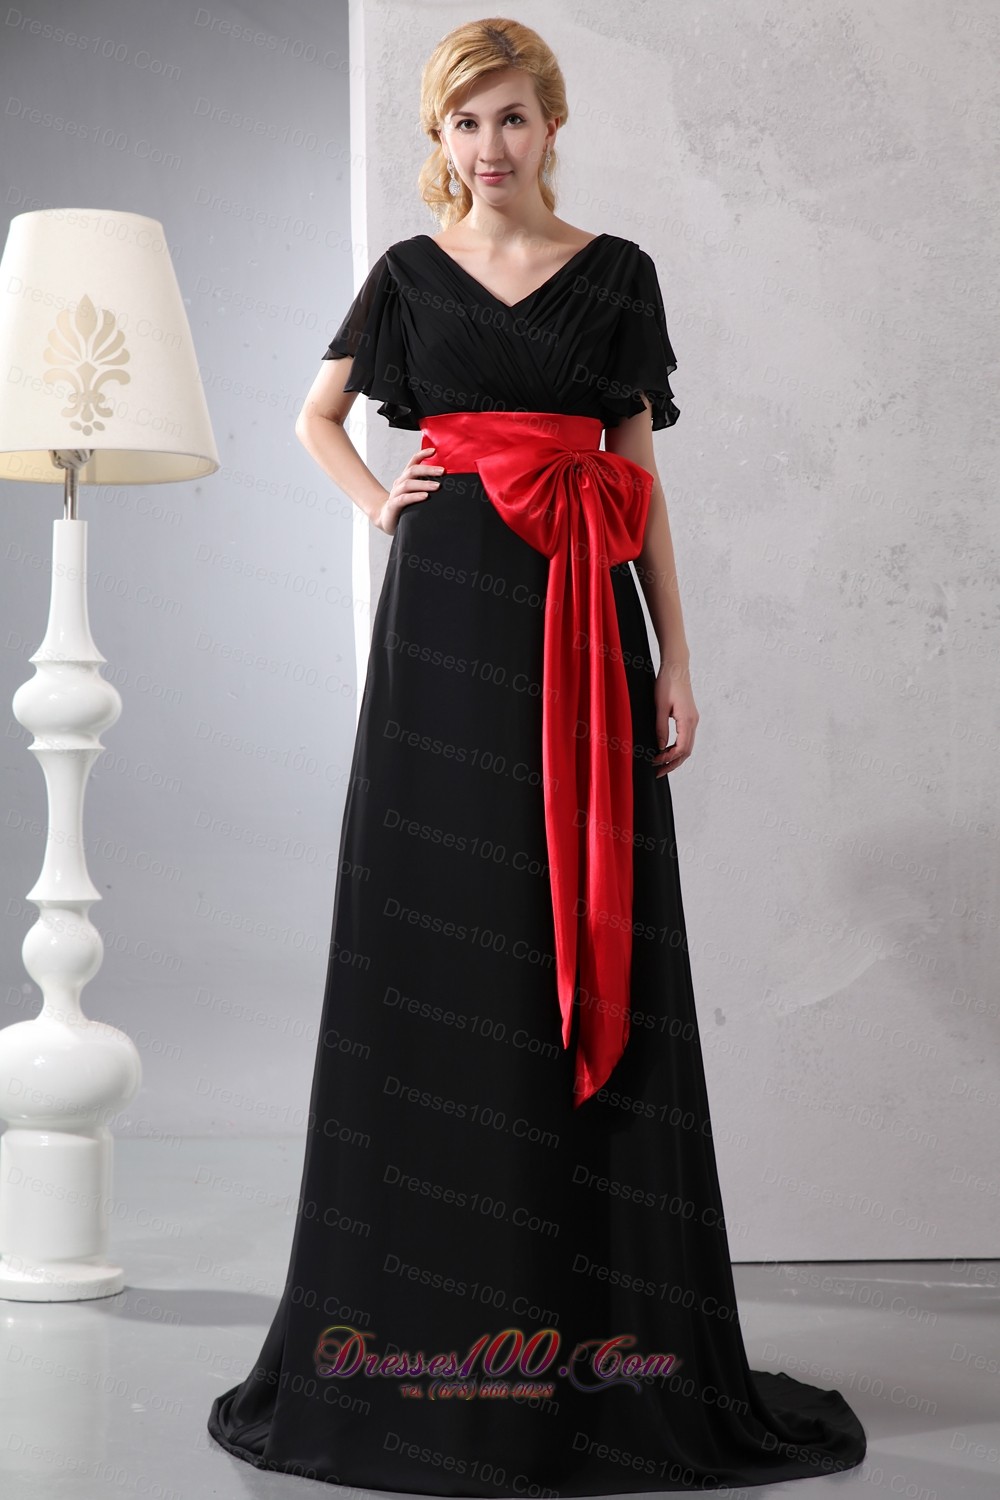 ... Prom Dresses, Black and Red Bowknot Butterfly Sleeves Prom Dress